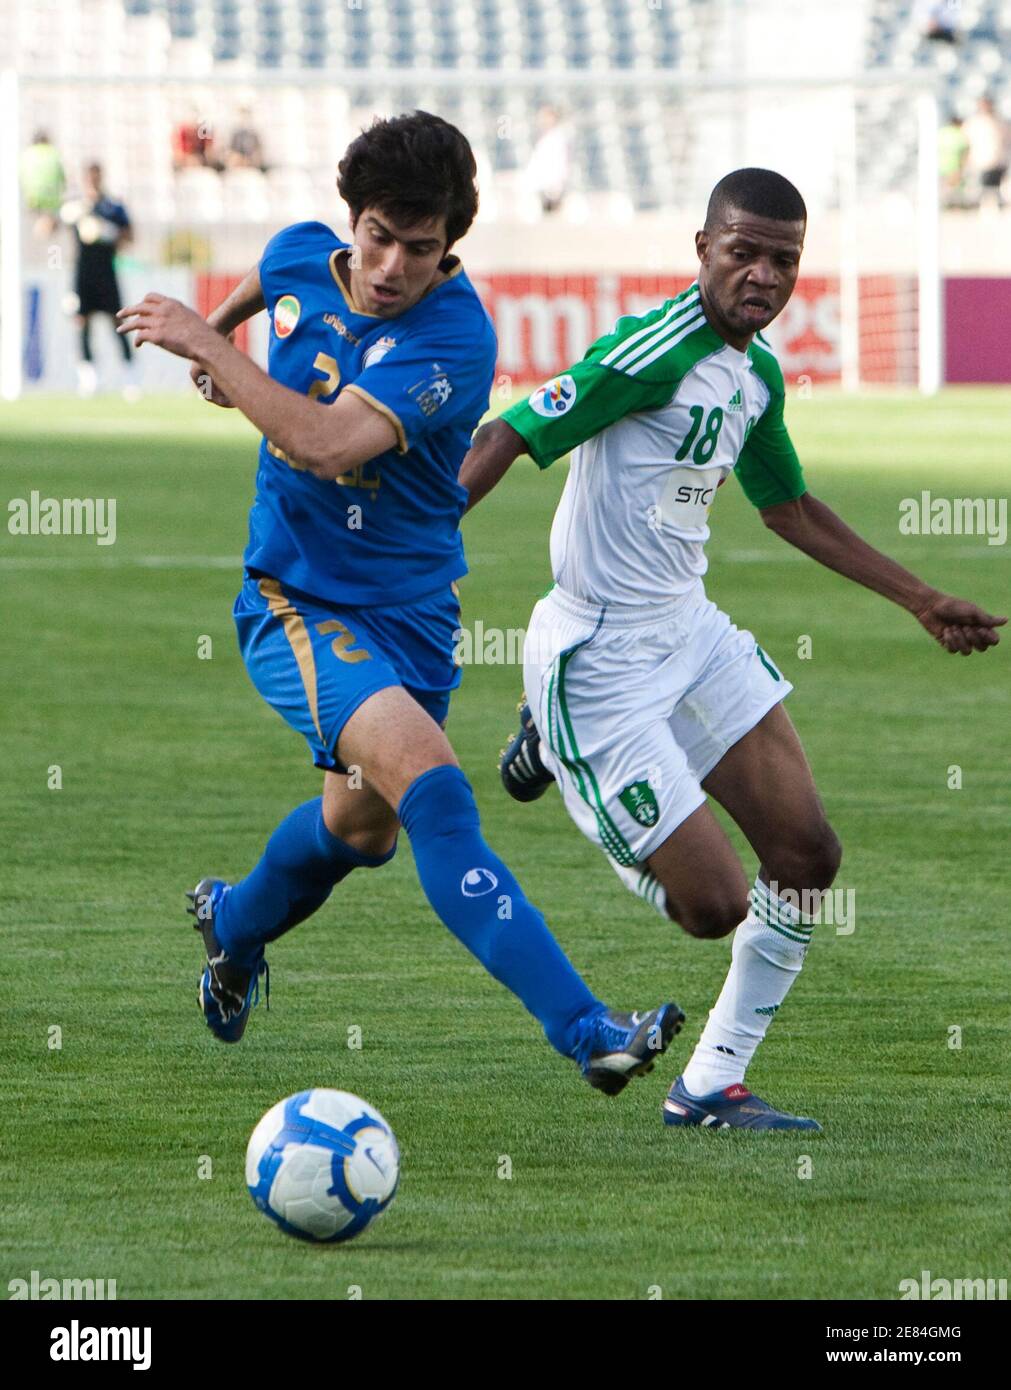 EDITORS' NOTE: Reuters and other foreign media are subject to Iranian restrictions on leaving the office to report, film or take pictures in Tehran.     Khosro Heydari (L) of Iran's Esteghlal fights for the ball with Faraj Ahmed Darvish of Saudi Arabia's Al Ahli during their AFC Champions League soccer match at Tehran's Azadi stadium April 14, 2010. REUTERS/Raheb Homavandi (IRAN - Tags: SPORT SOCCER) Stock Photo